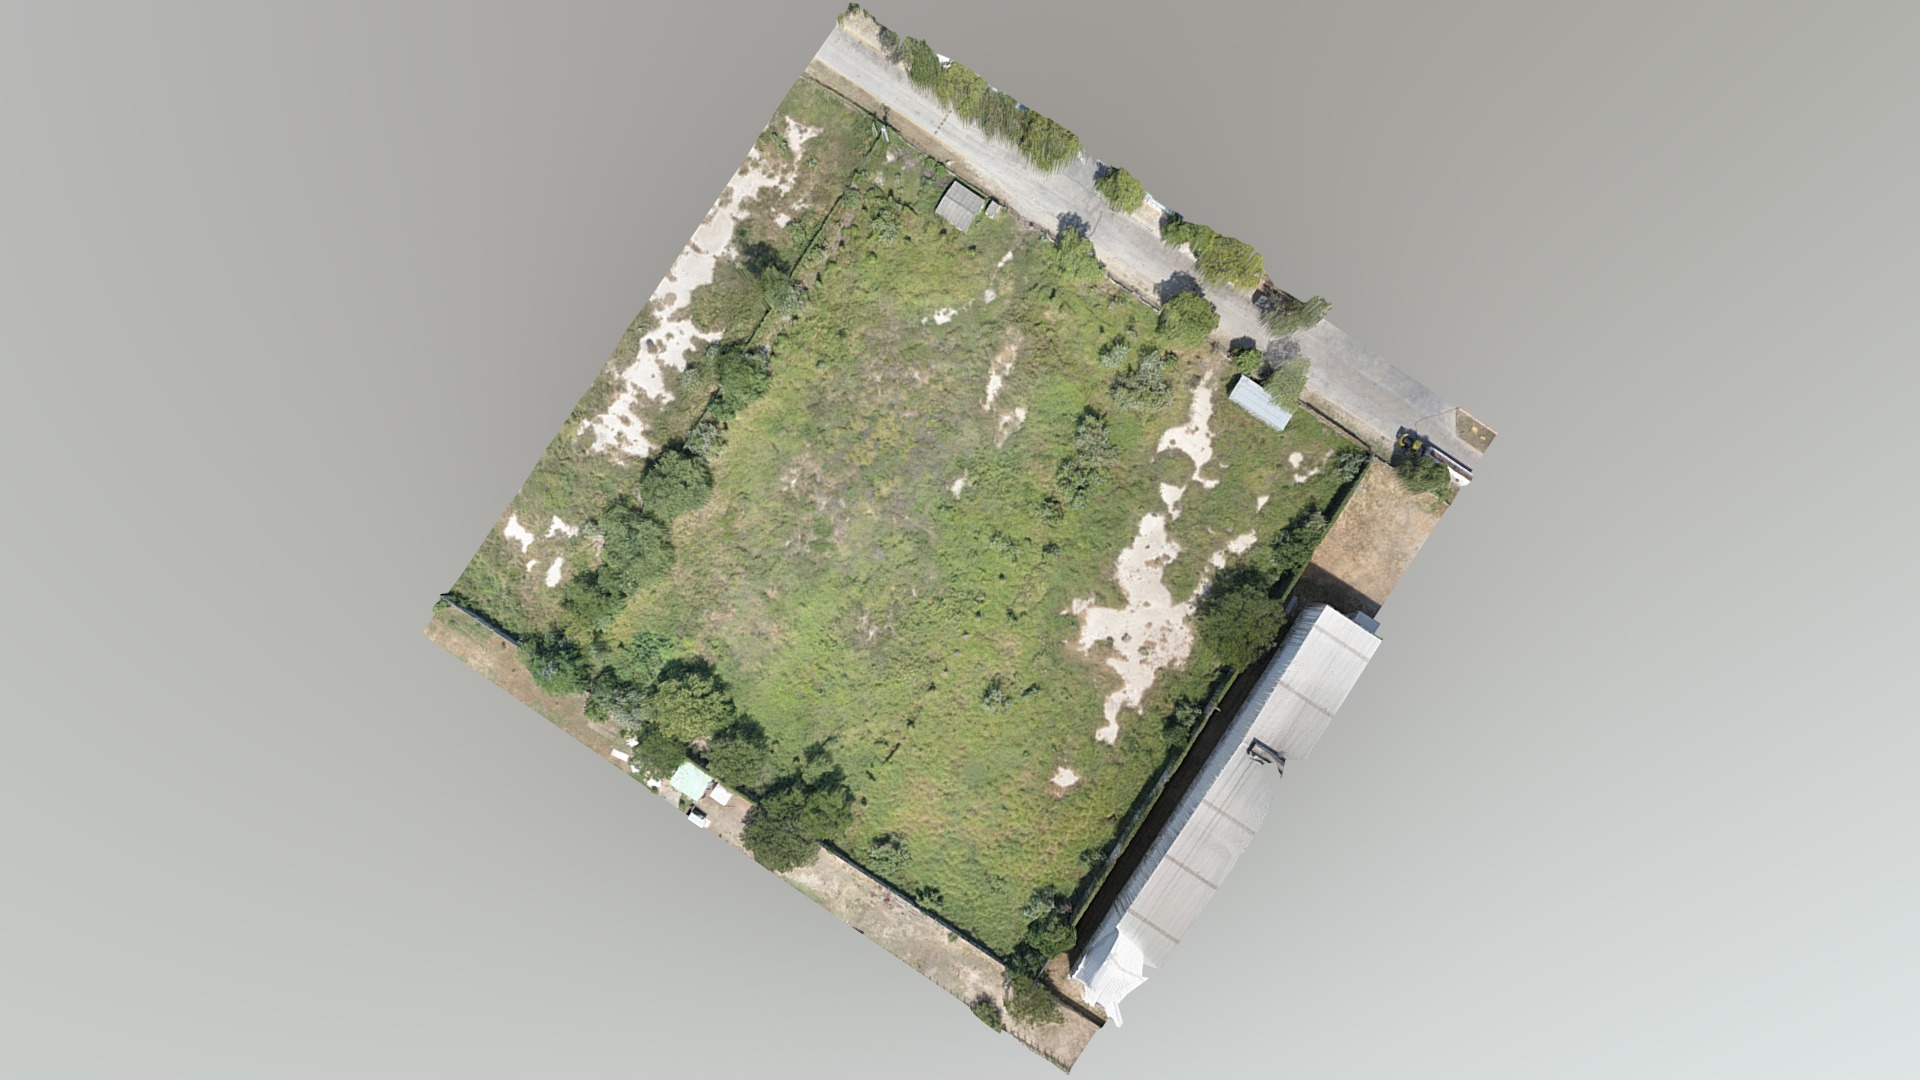 3D model Free zone geolocated layout  L5 11282018 - This is a 3D model of the Free zone geolocated layout  L5 11282018. The 3D model is about a building on a hill.